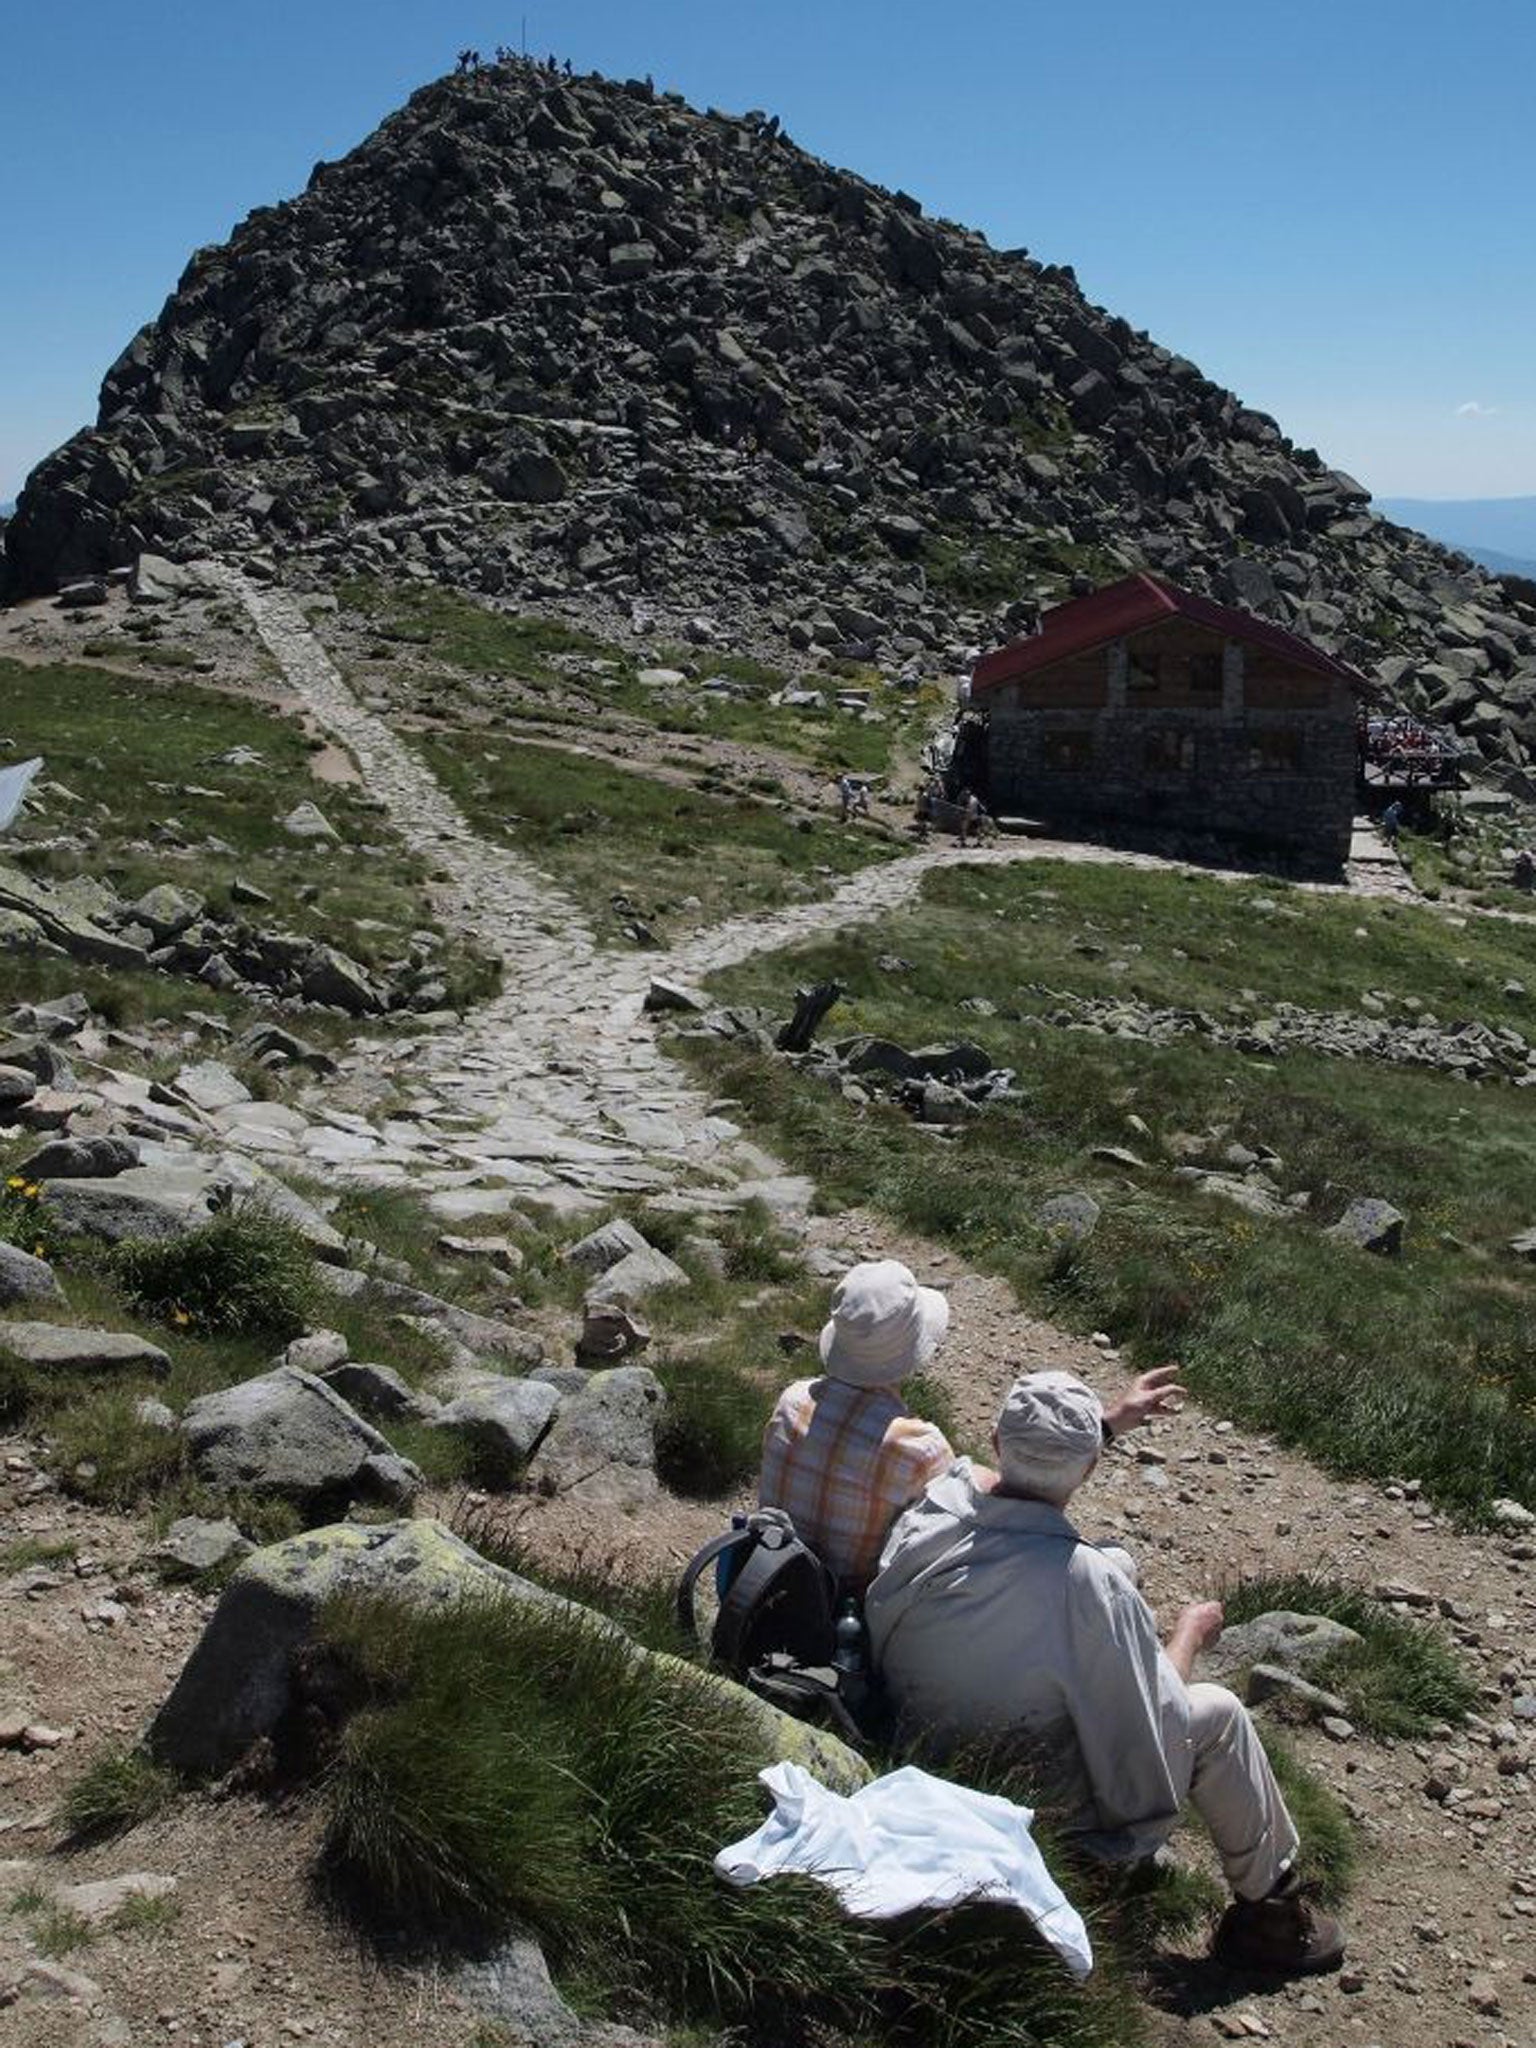 An elderly couple take a quite moment near the peak of Chopok mountain in Low Tatra mountains